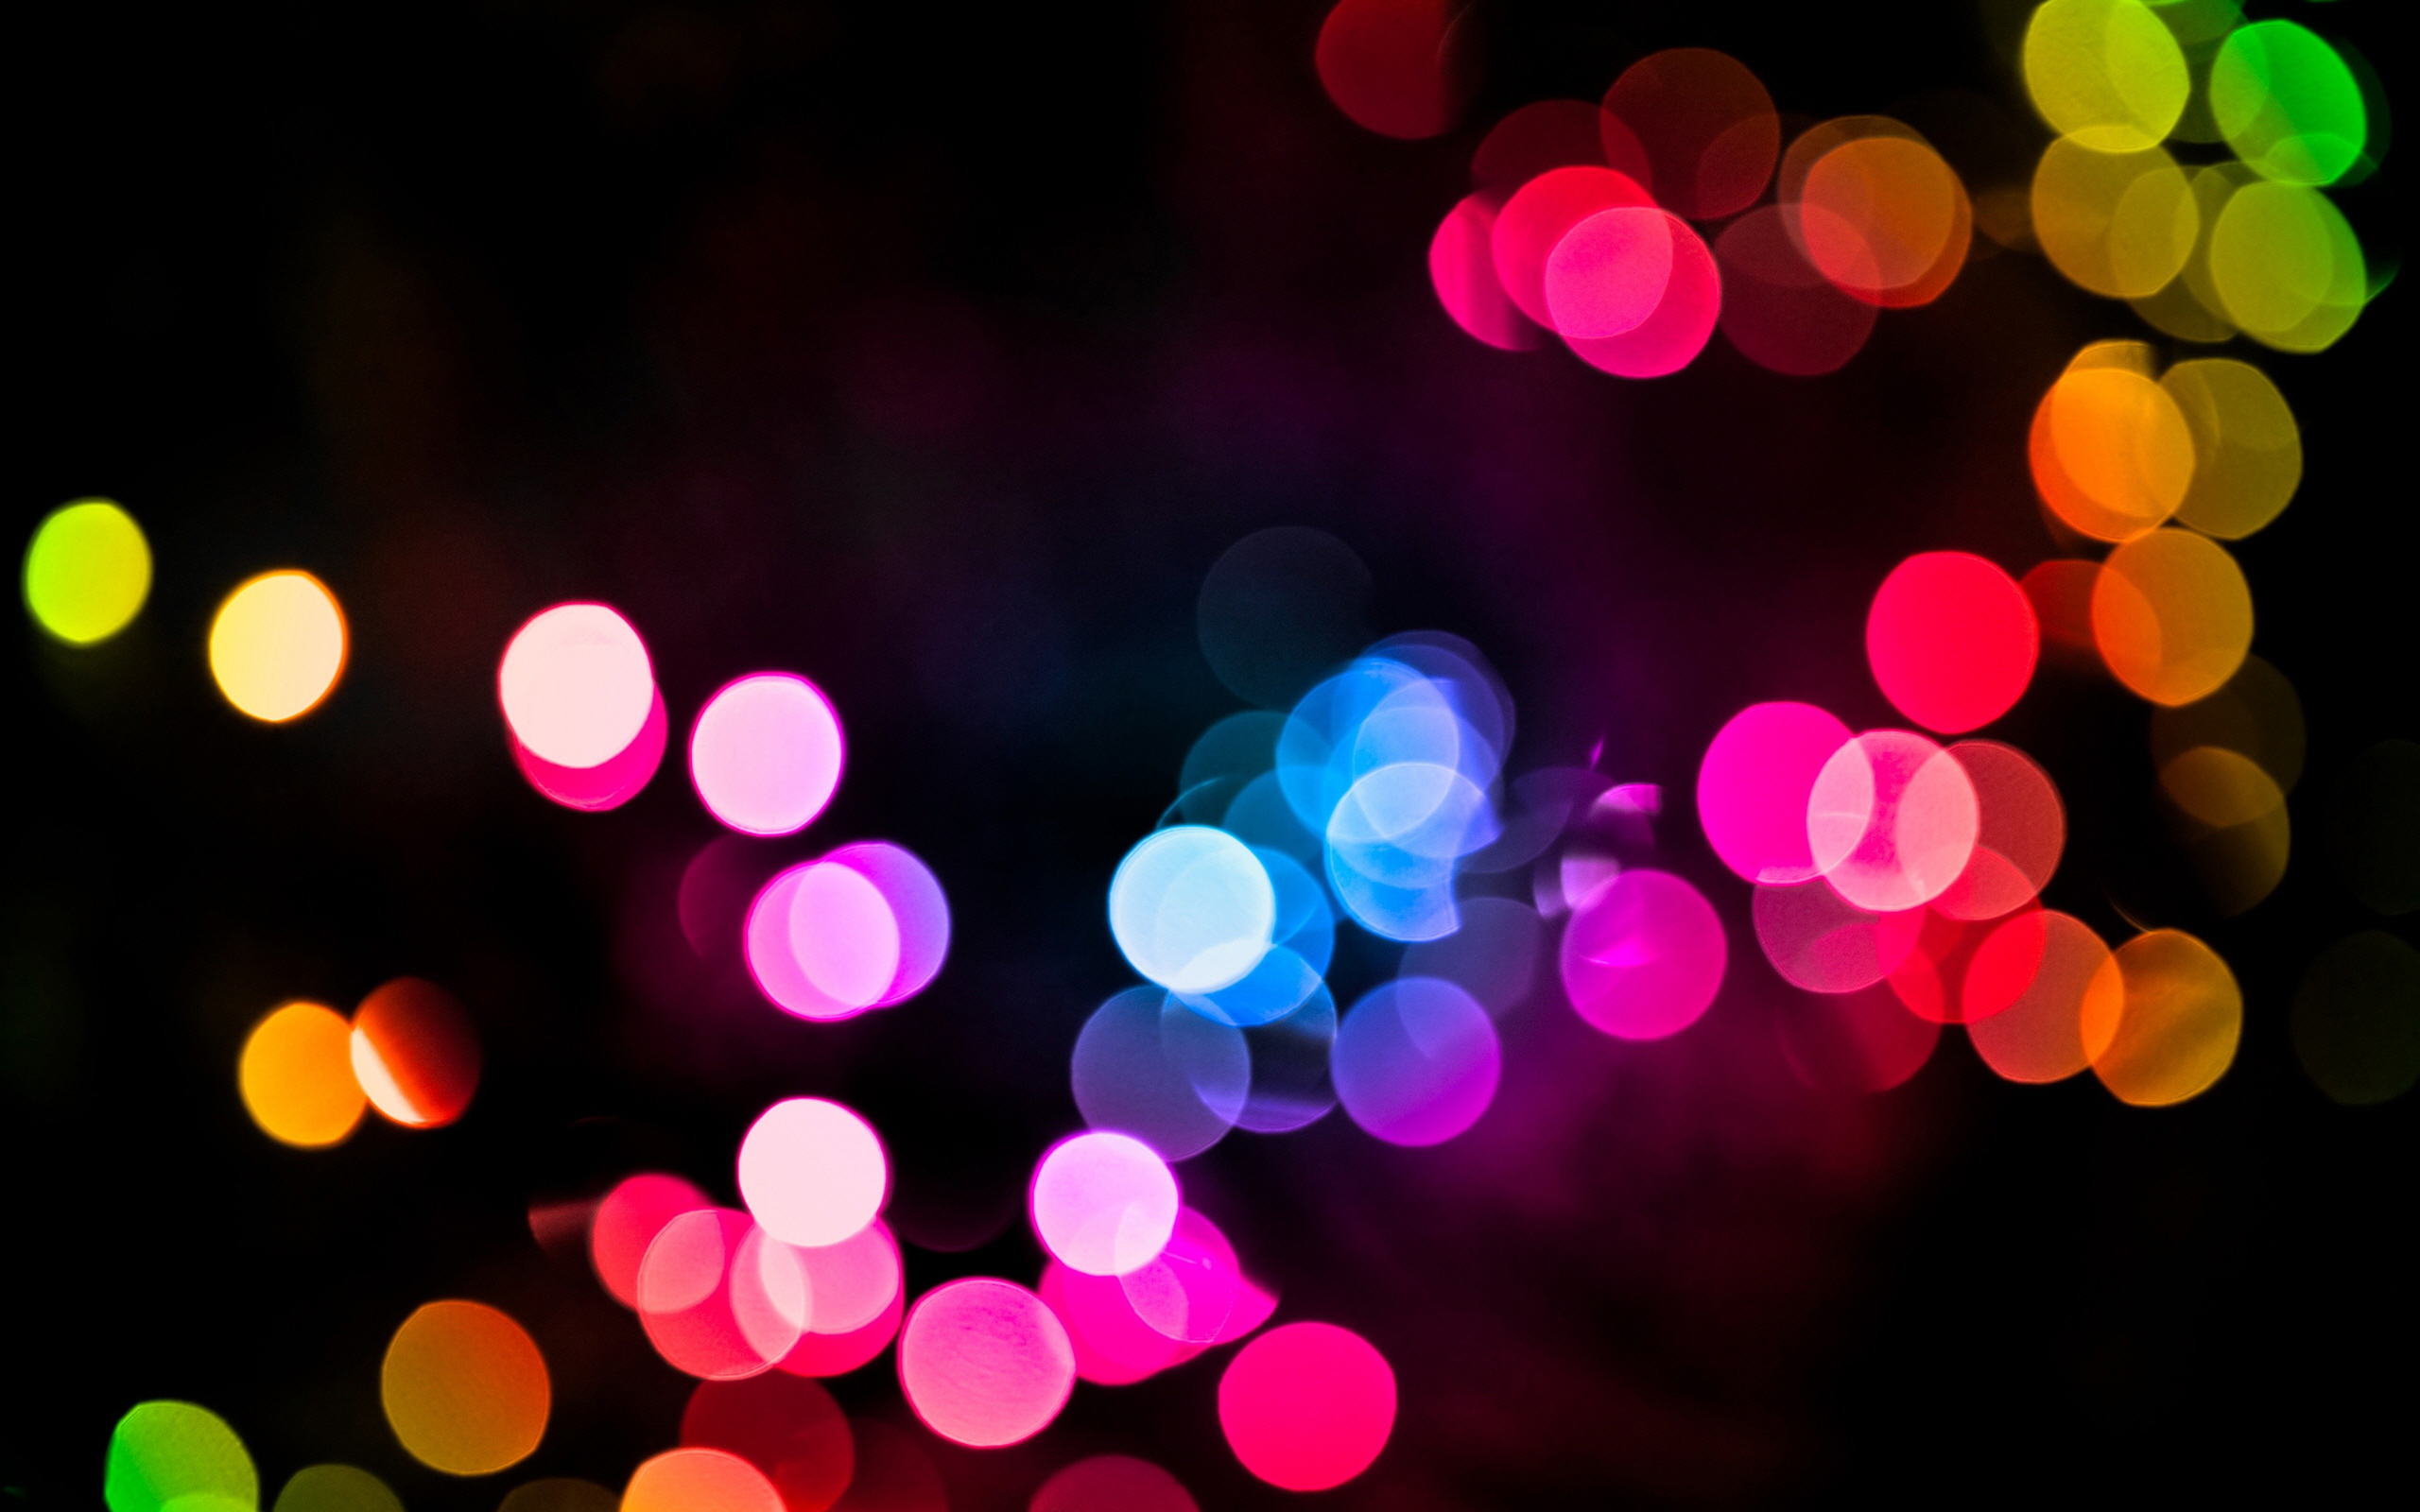 Bokeh Colorful Lights Blurred, HD Photography, 4k Wallpapers, Images